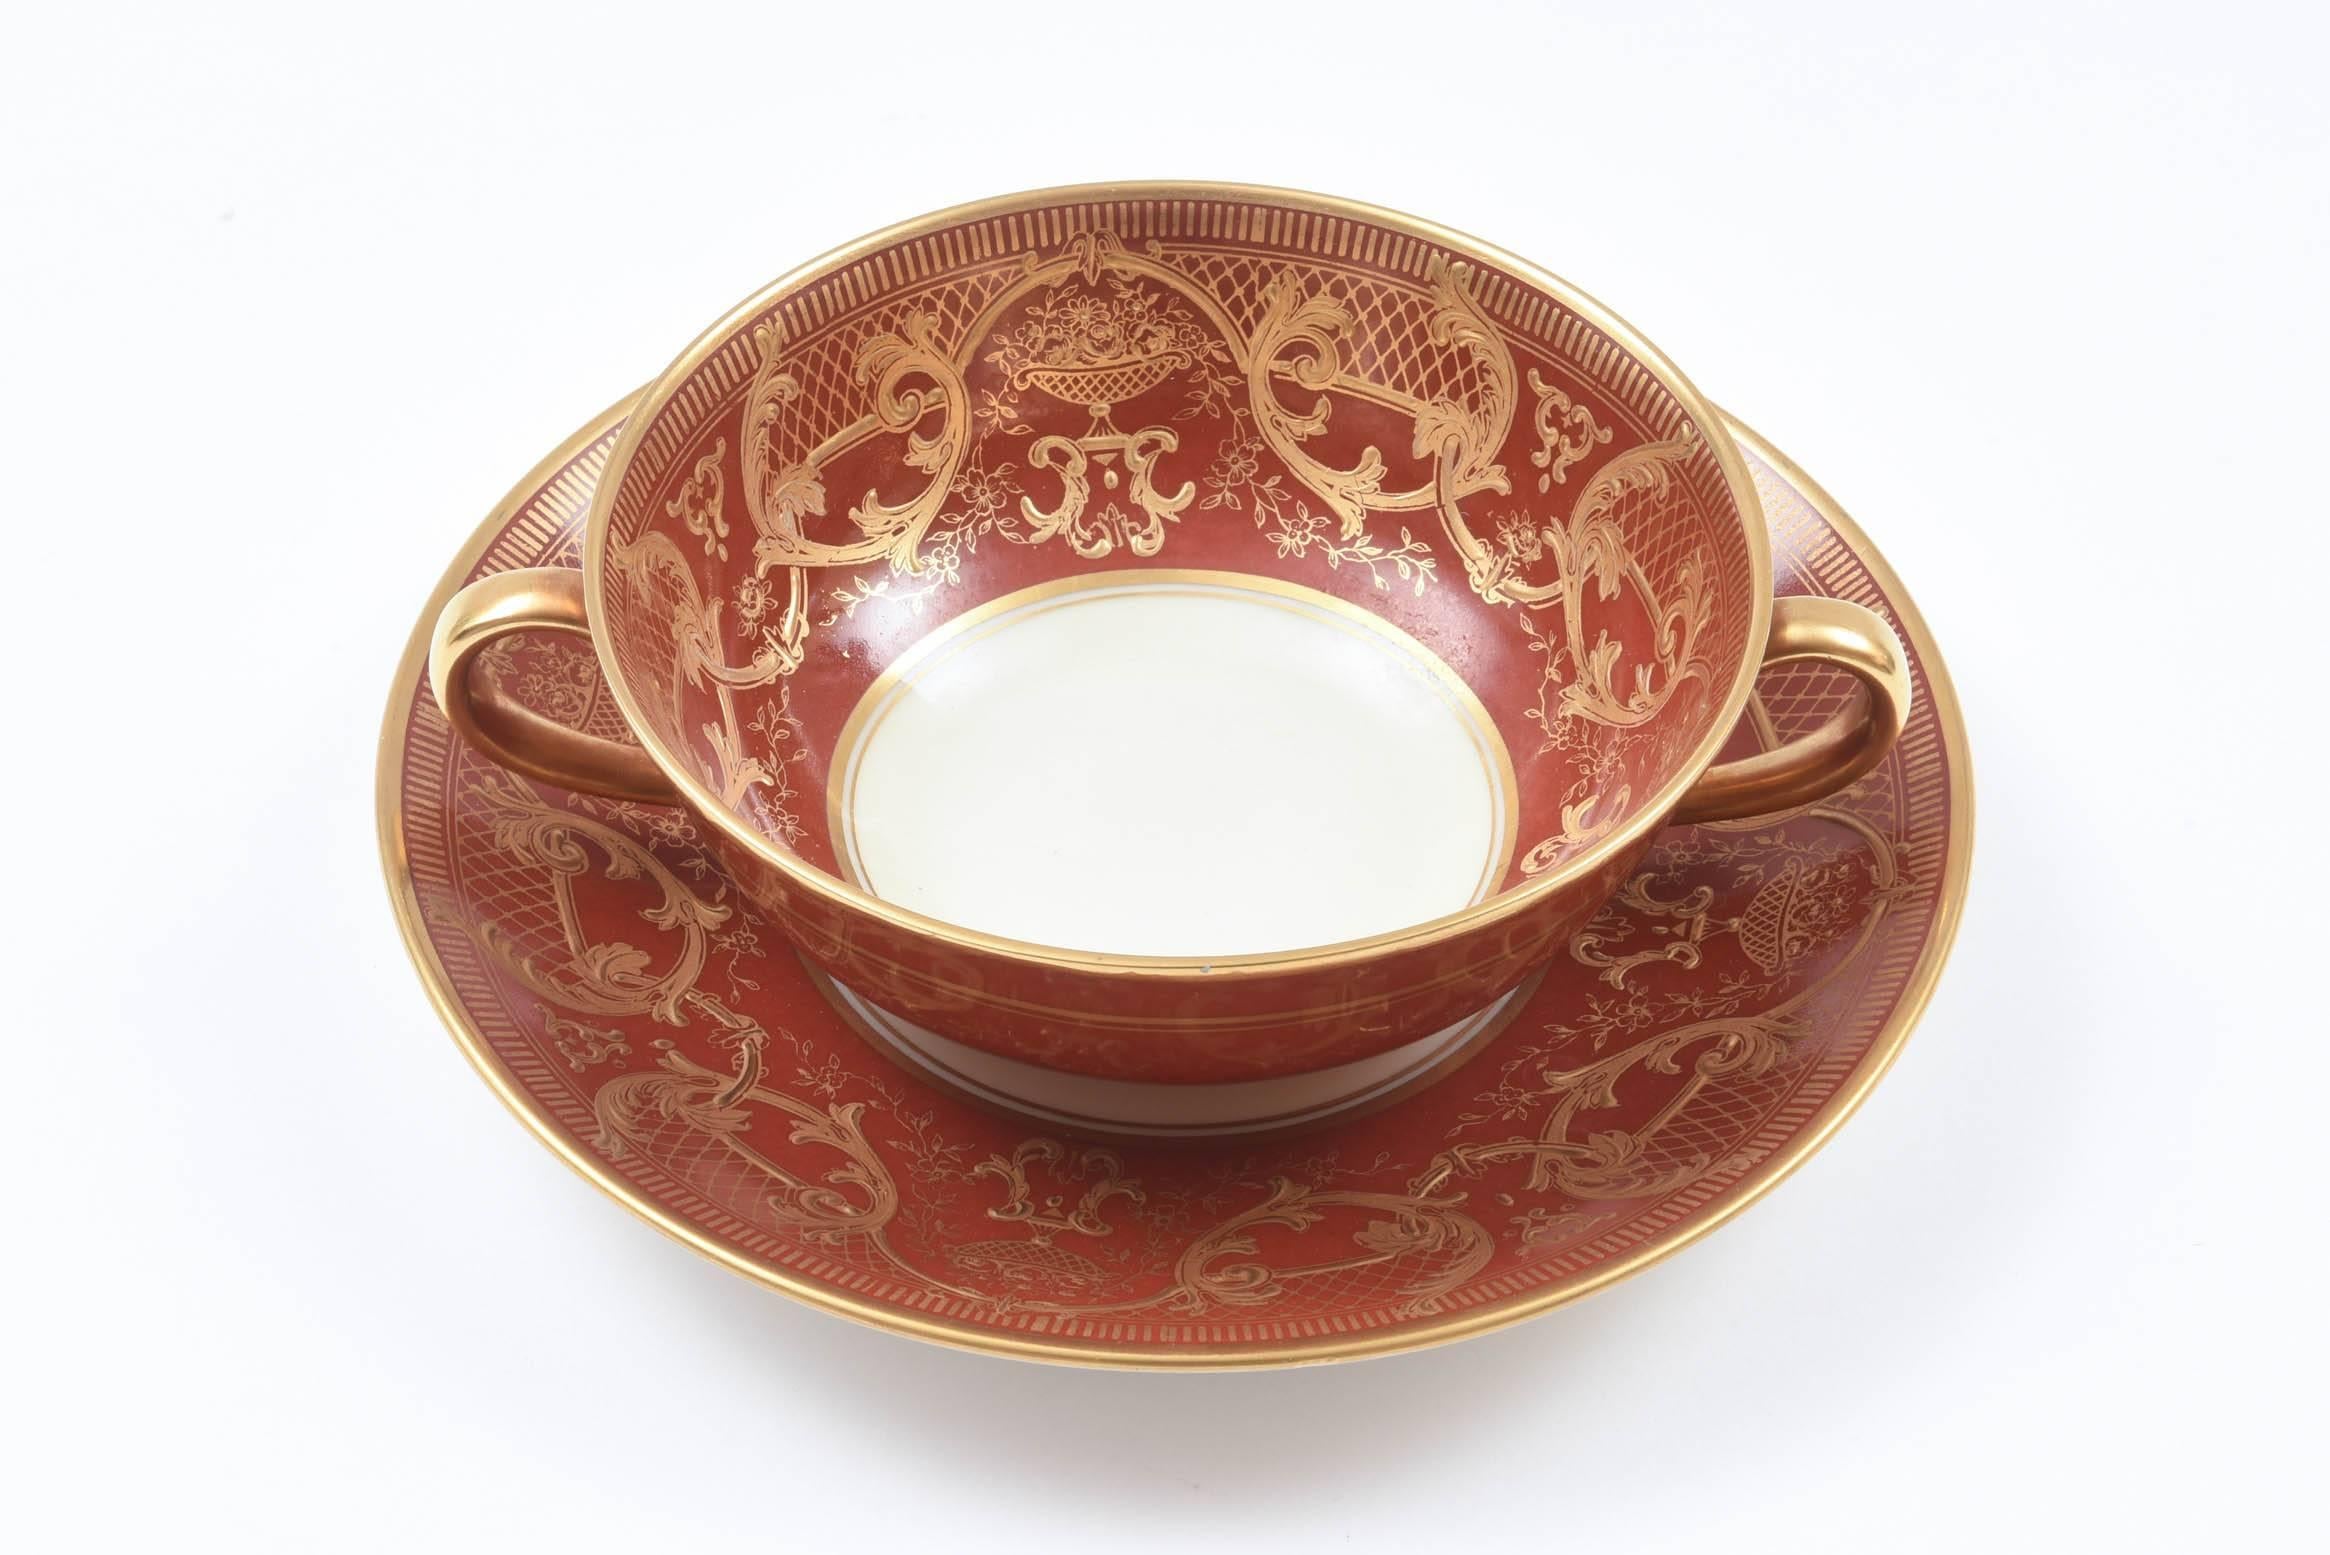 A great set of 12 matching soup or dessert cups and their 12 underplates ready for Holiday Entertaining. Raised tooled gilding on a dark orange ground. Custom ordered through the fine gilded age retailer Ovington Brothers New York. A very versatile